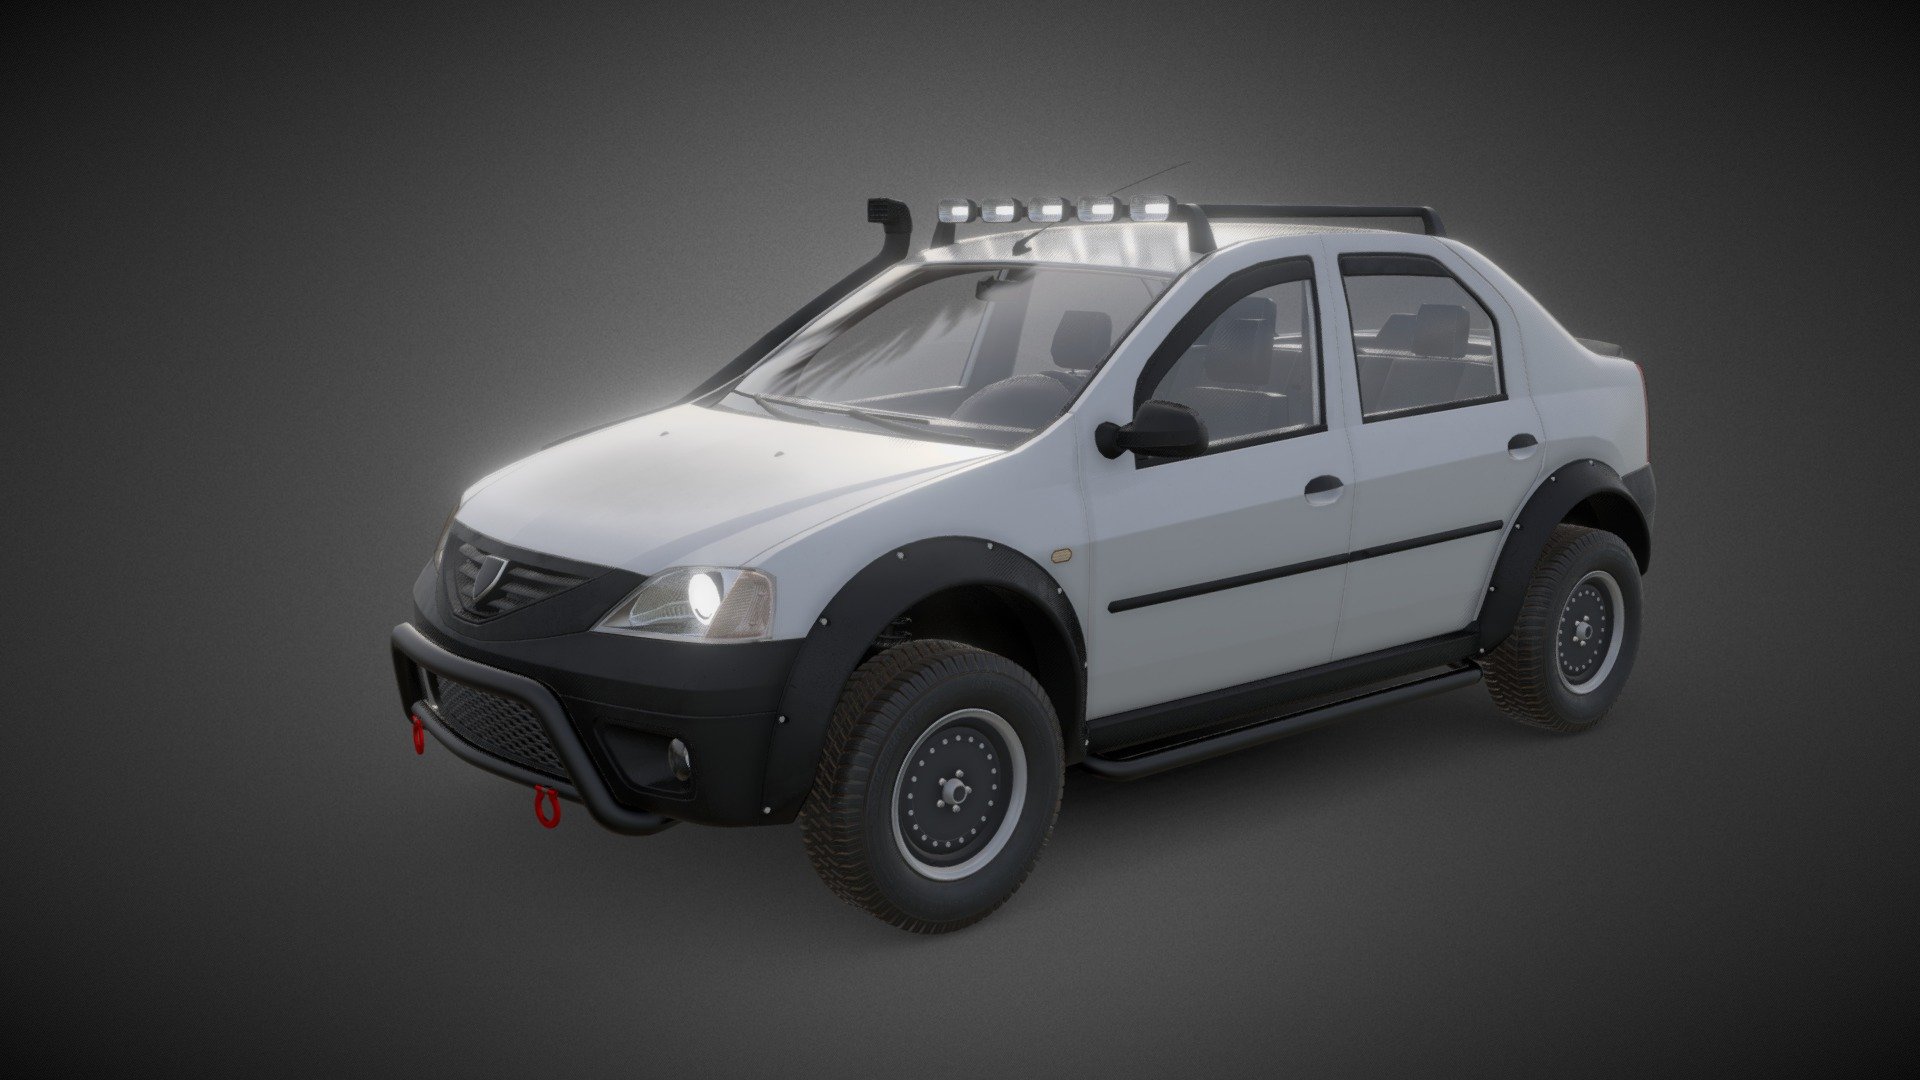 Dacia Logan (or Golan as I like to call it) Off-Limits

My series of reinterpreted Dacia cars for adventurers continues and I don't know when it stops.

Dacia Logan is another Romanian car that I've seen countless times around me over the years, but only recently have I started to appreciate it more for its well-designed shapes and simple lines that harmonize with each other. It didn't take long until I had the curiosity to see what a Logan adapted to the most difficult routes would look like. A stronger and more imposing Logan.

So here it is, the Golan 4x4 with its specific modifications!

Enjoy! Lemme know your thoughts about this concept.

Credits for the base model go to: https://gamemodding.com/en/gta-san-andreas/cars/70423-dacia-logan-2007.html

Modeled in Blender. Roughness texture from Quixel Bridge 3d model